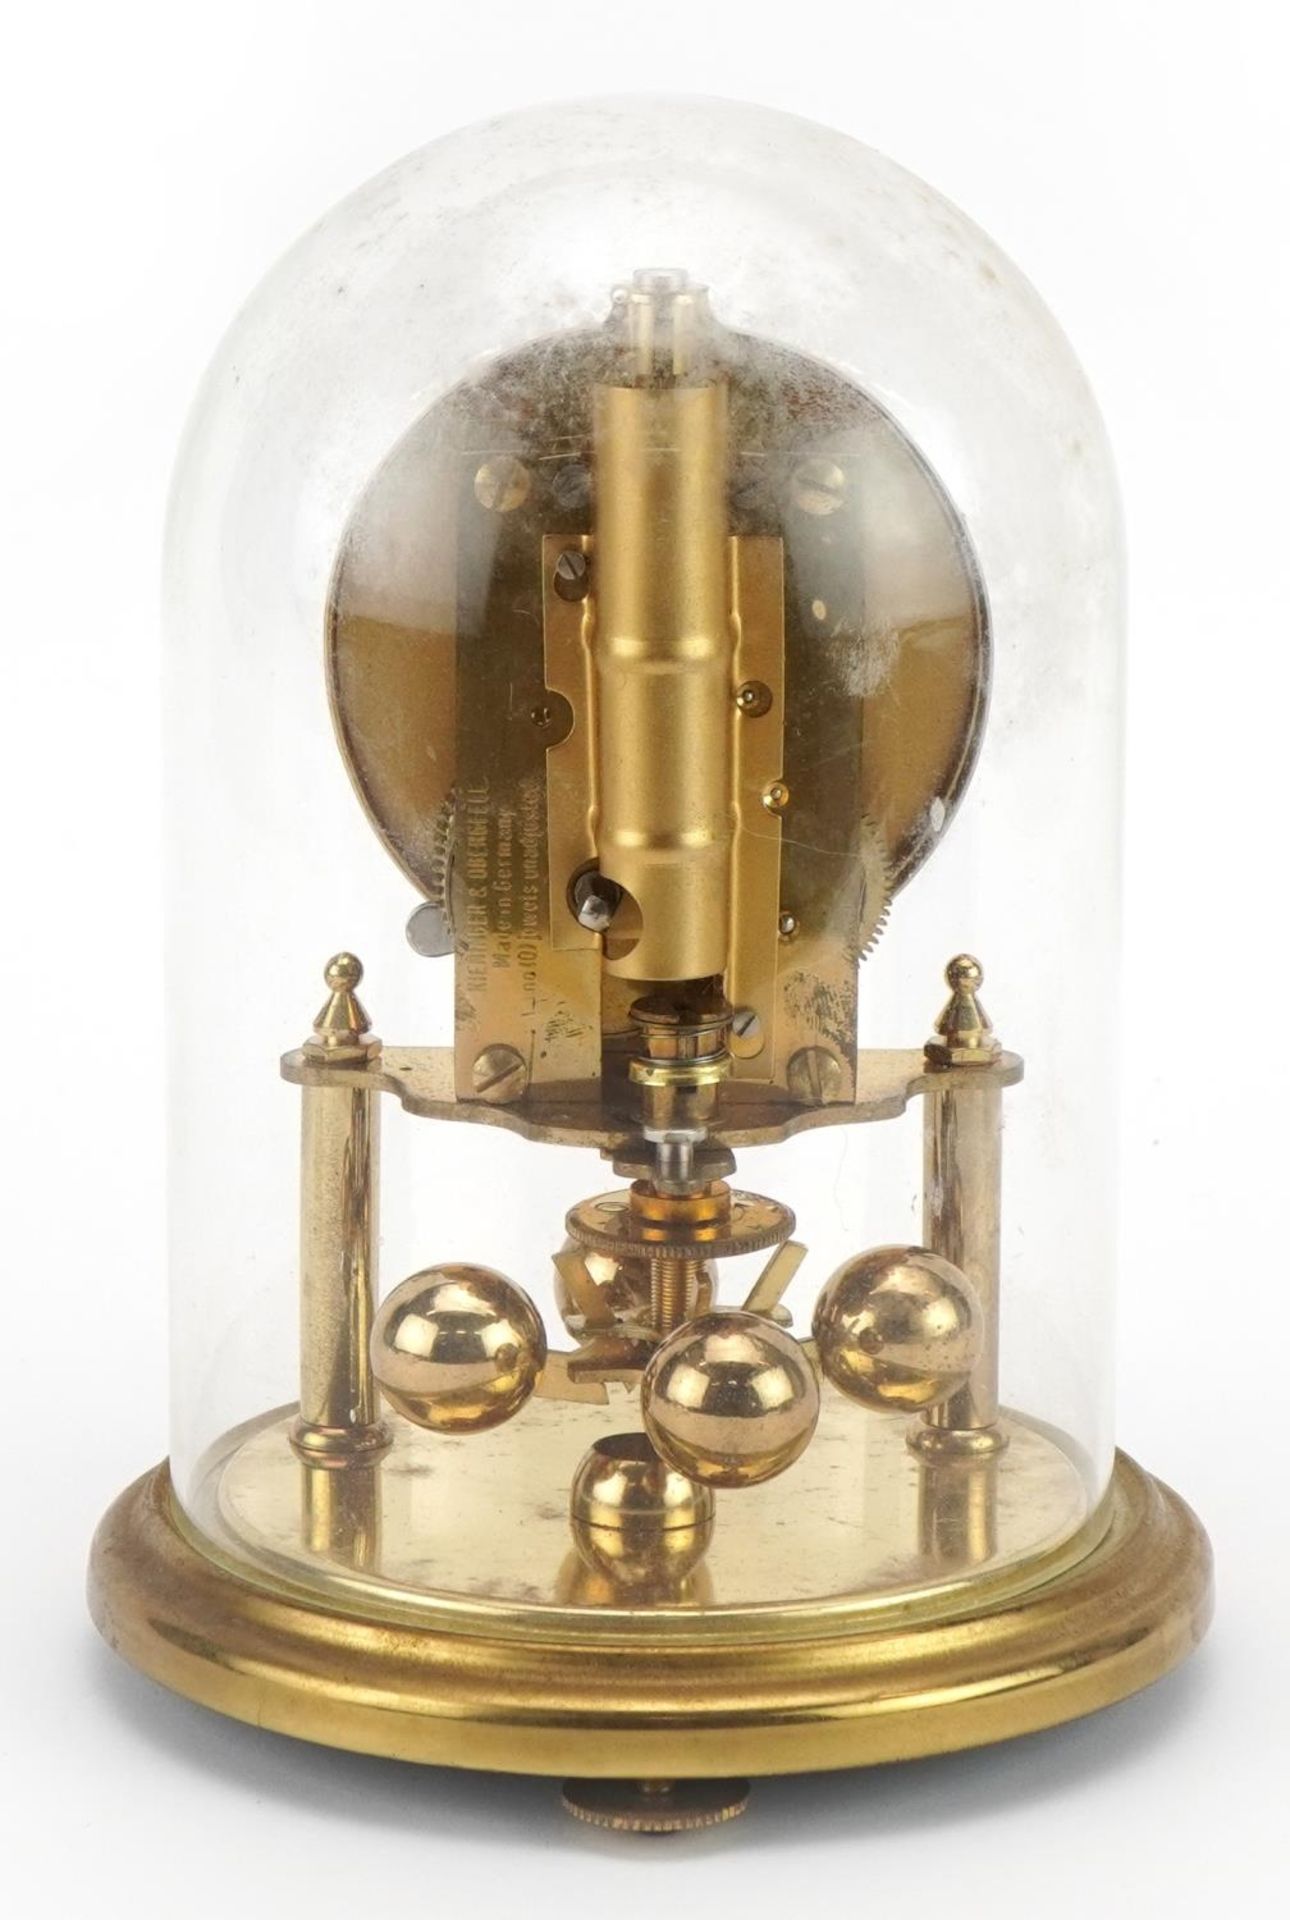 Kendo brass anniversary clock under a glass dome, 18cm high - Image 2 of 4